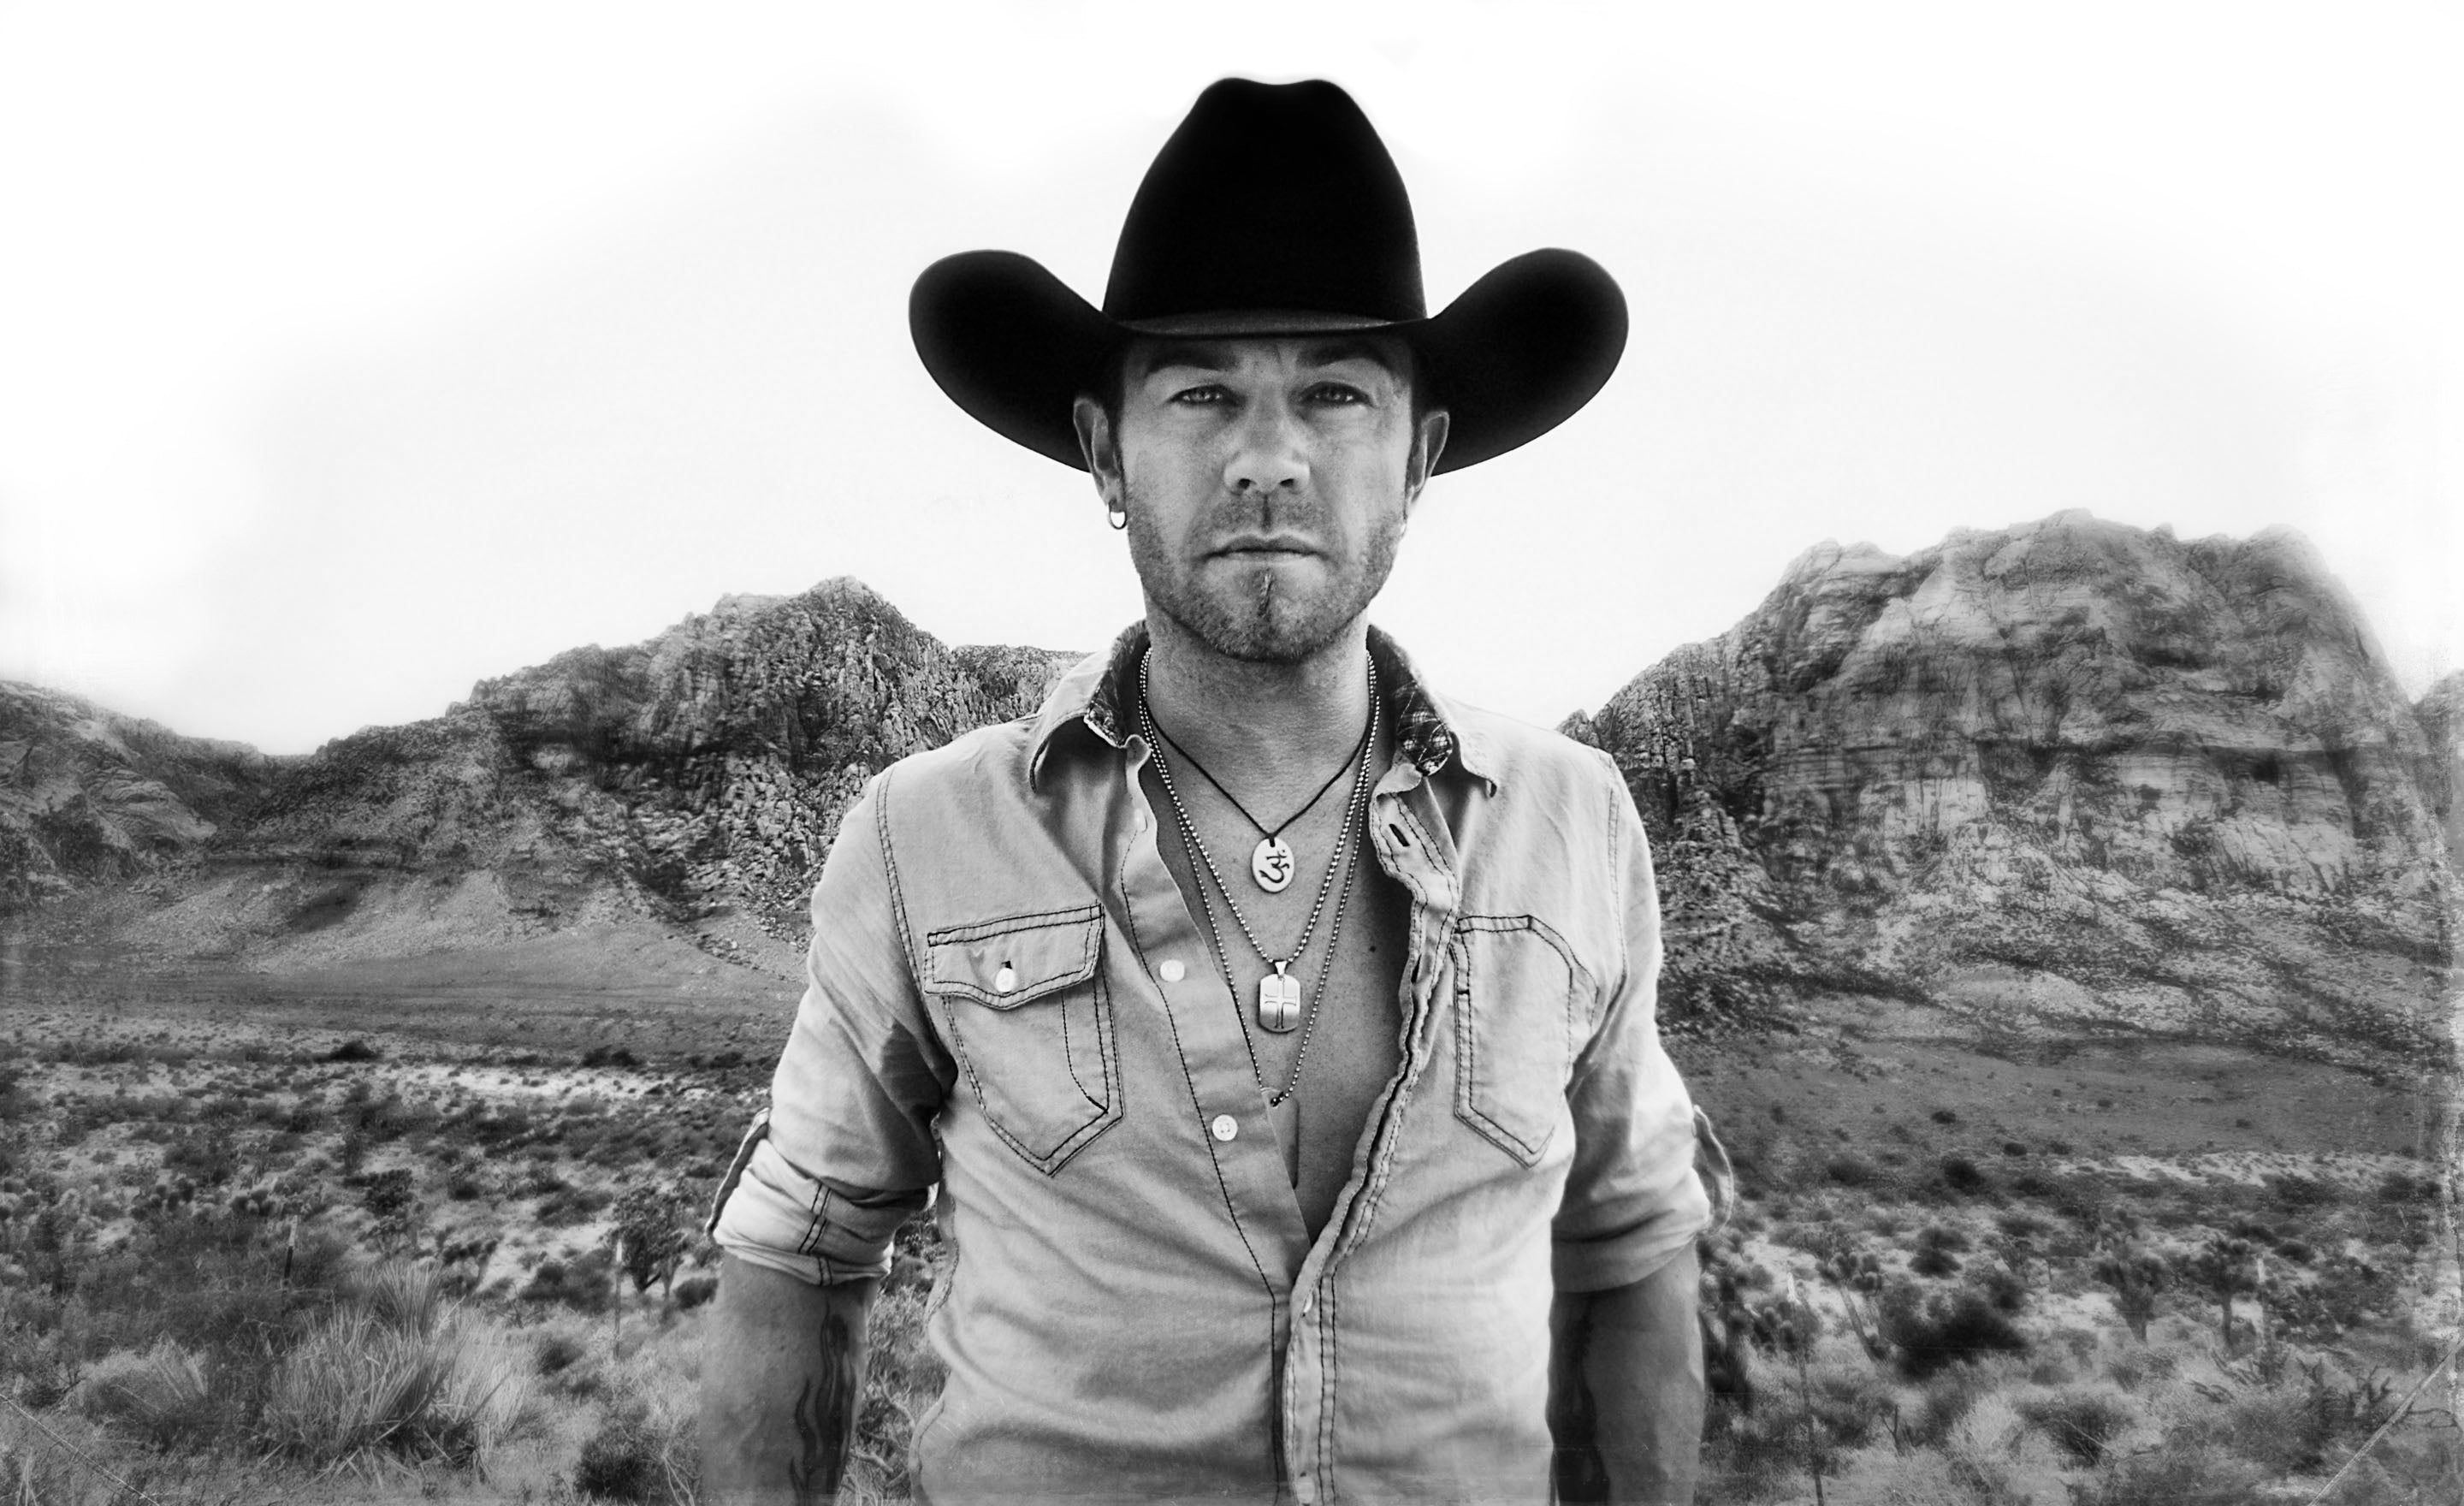 Black and white portrait country music artist Aaron Pritchett standing in front of desert canyon wearing black cowboy hat and denim shirt